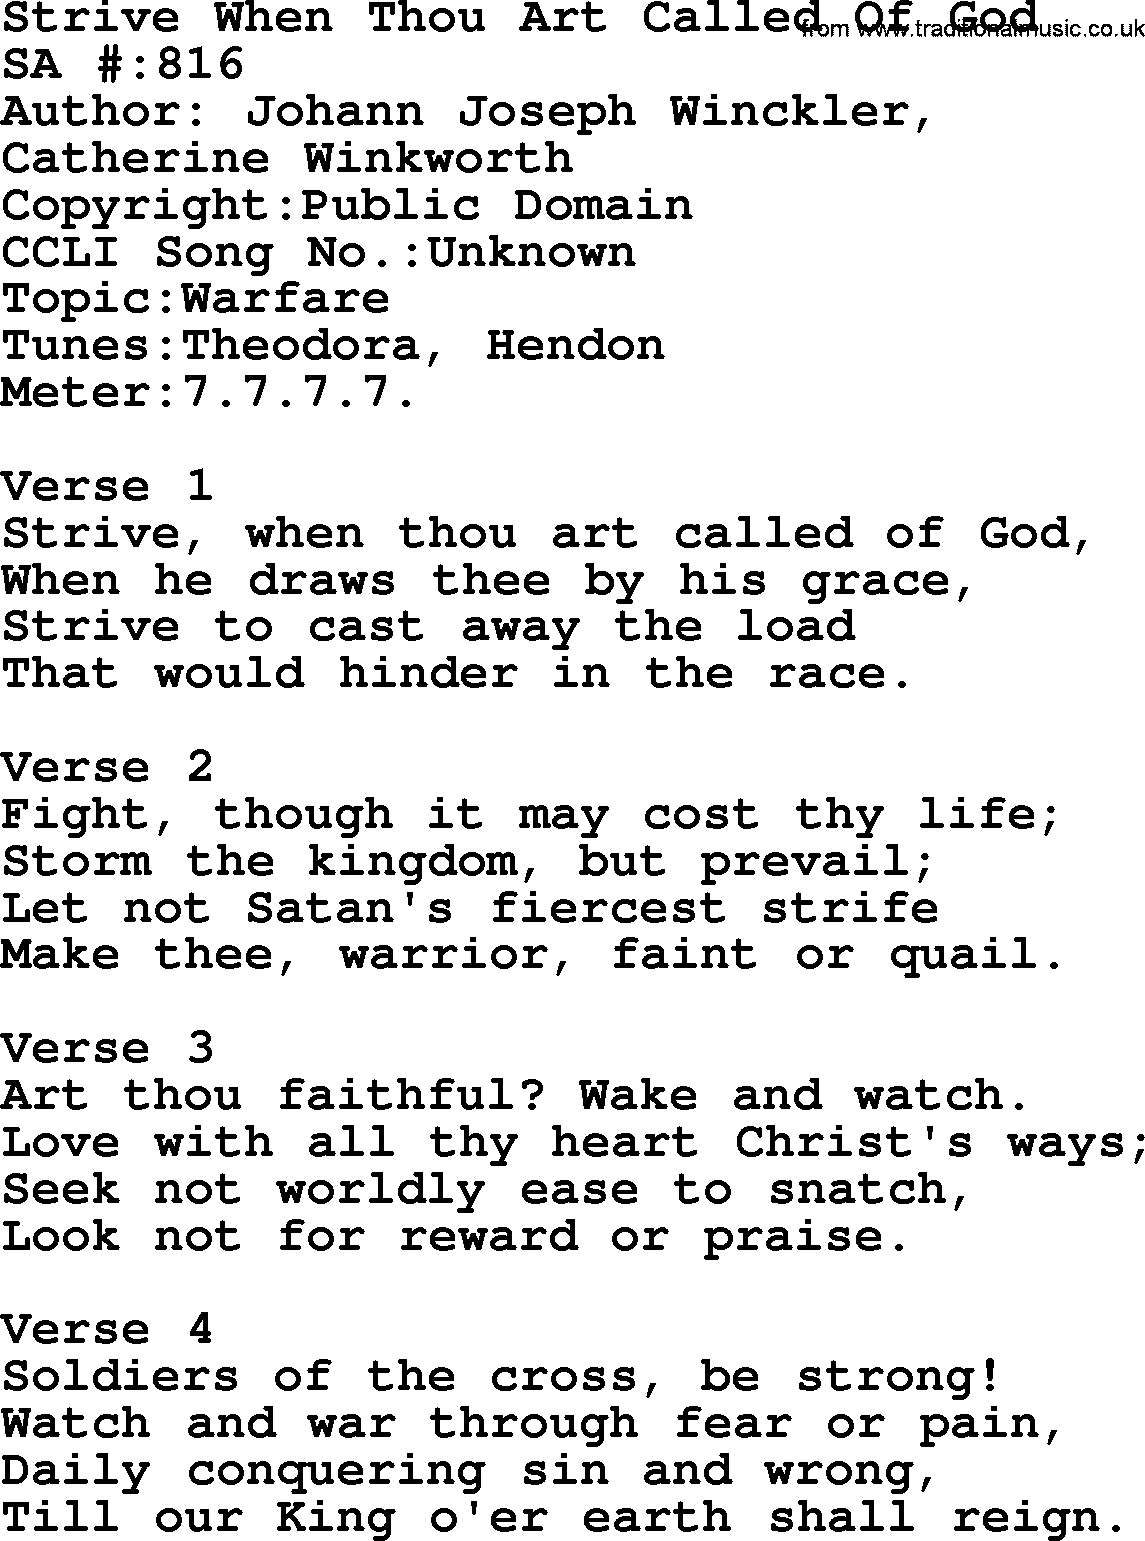 Salvation Army Hymnal, title: Strive When Thou Art Called Of God, with lyrics and PDF,